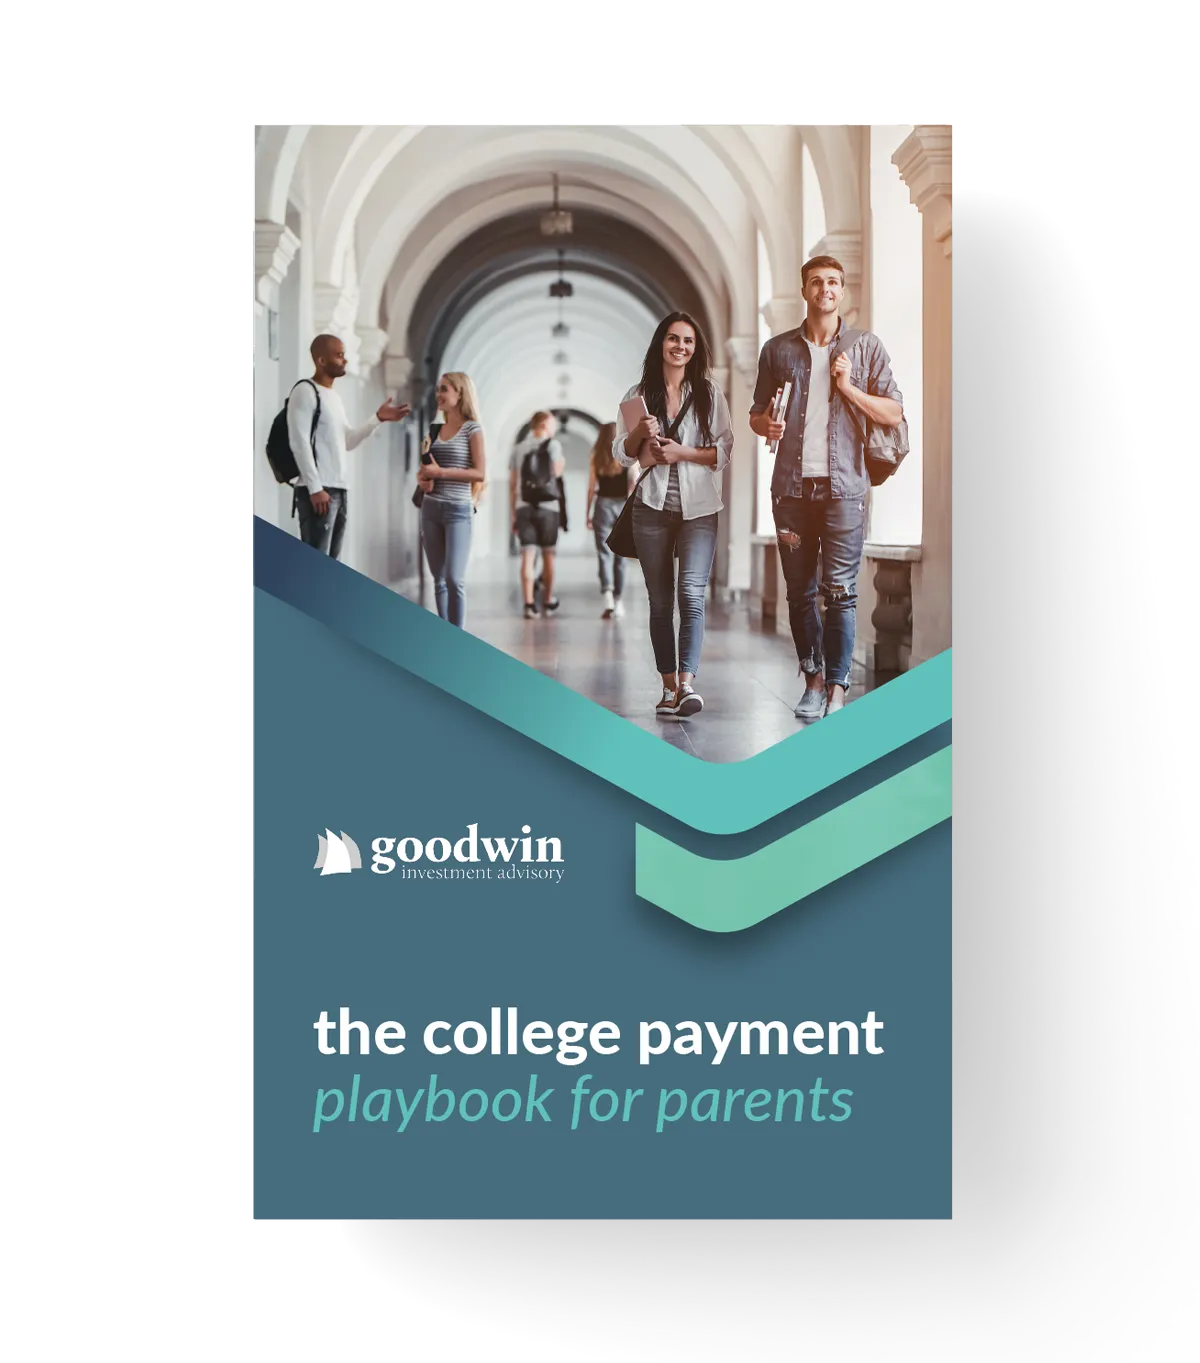 The College Payment Playbook for Parents